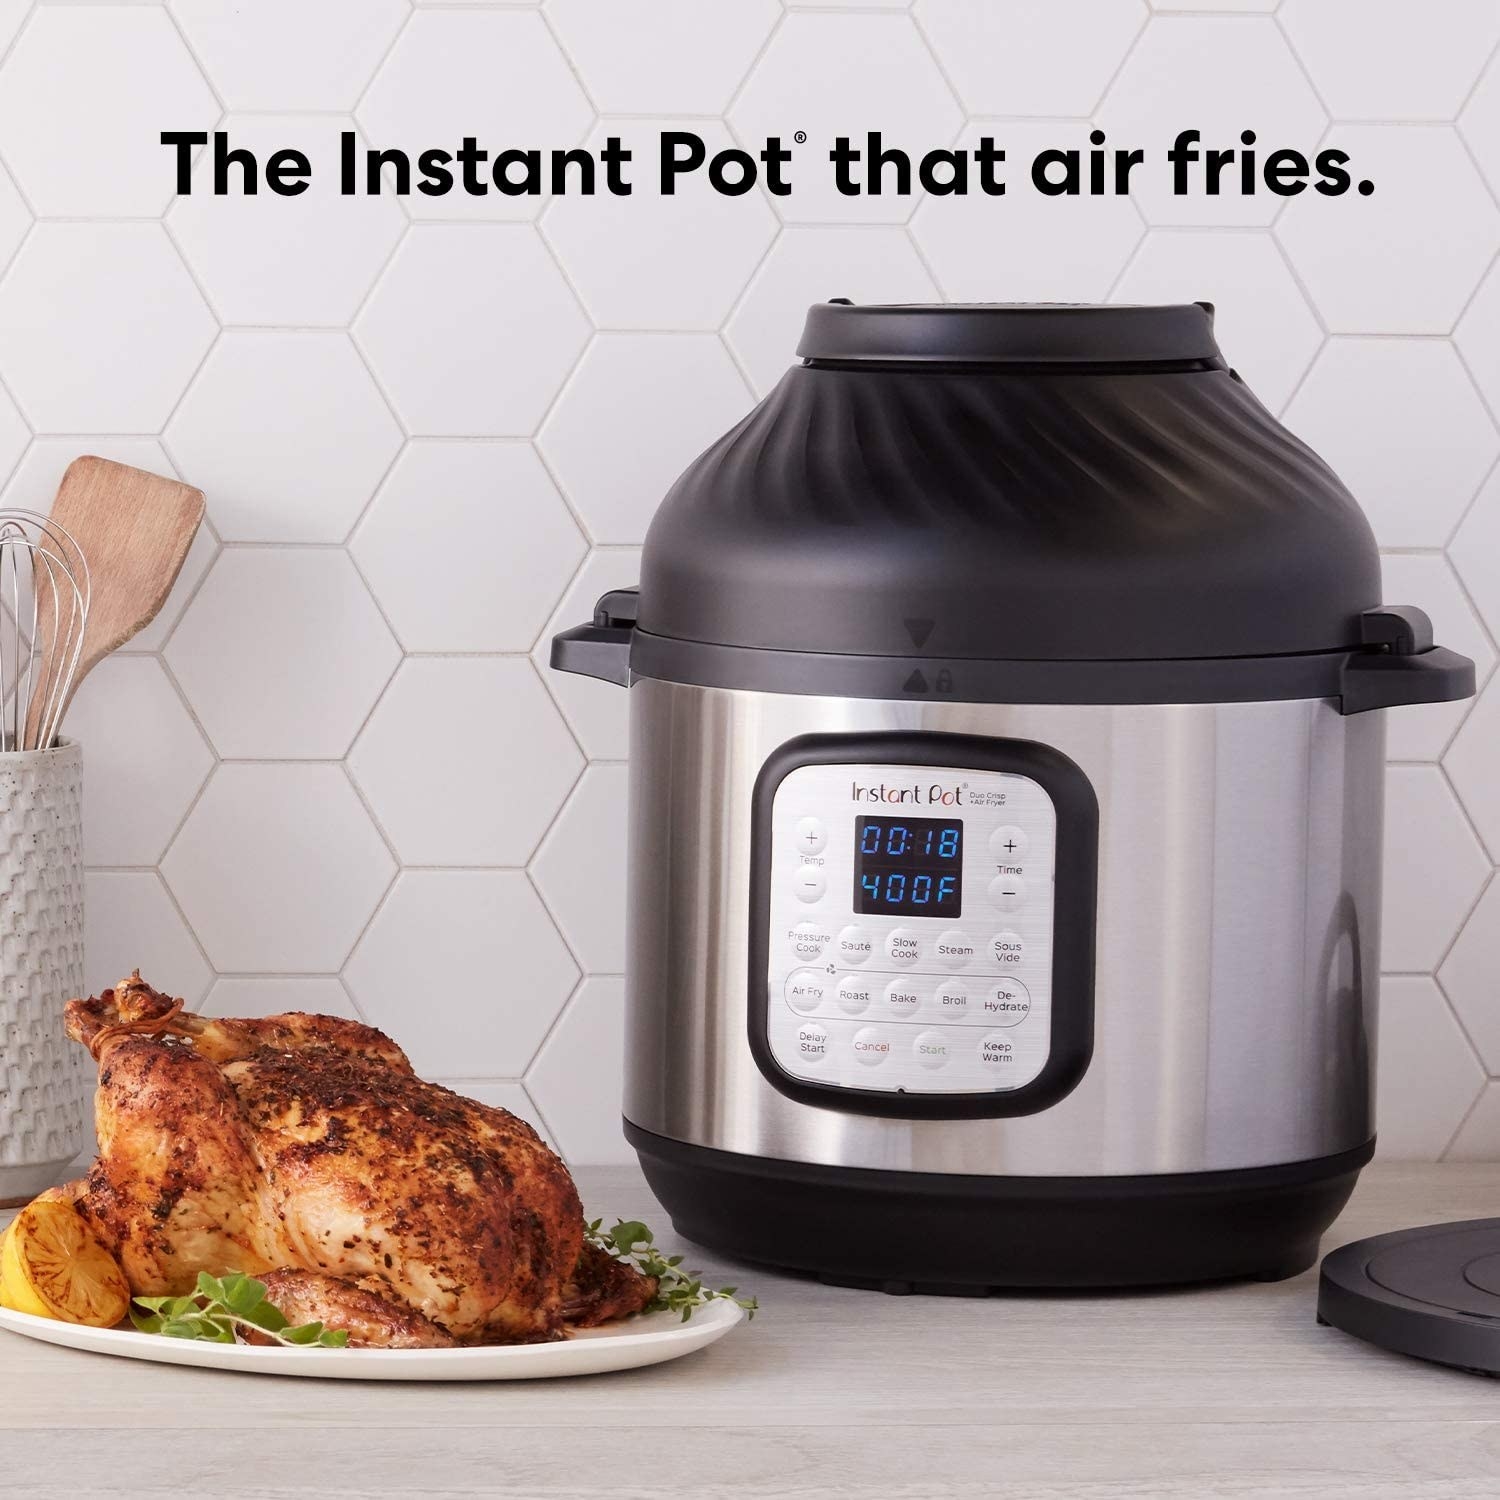 Instant Pot Duo Crisp placed on table with plate of cooked chicken on the side